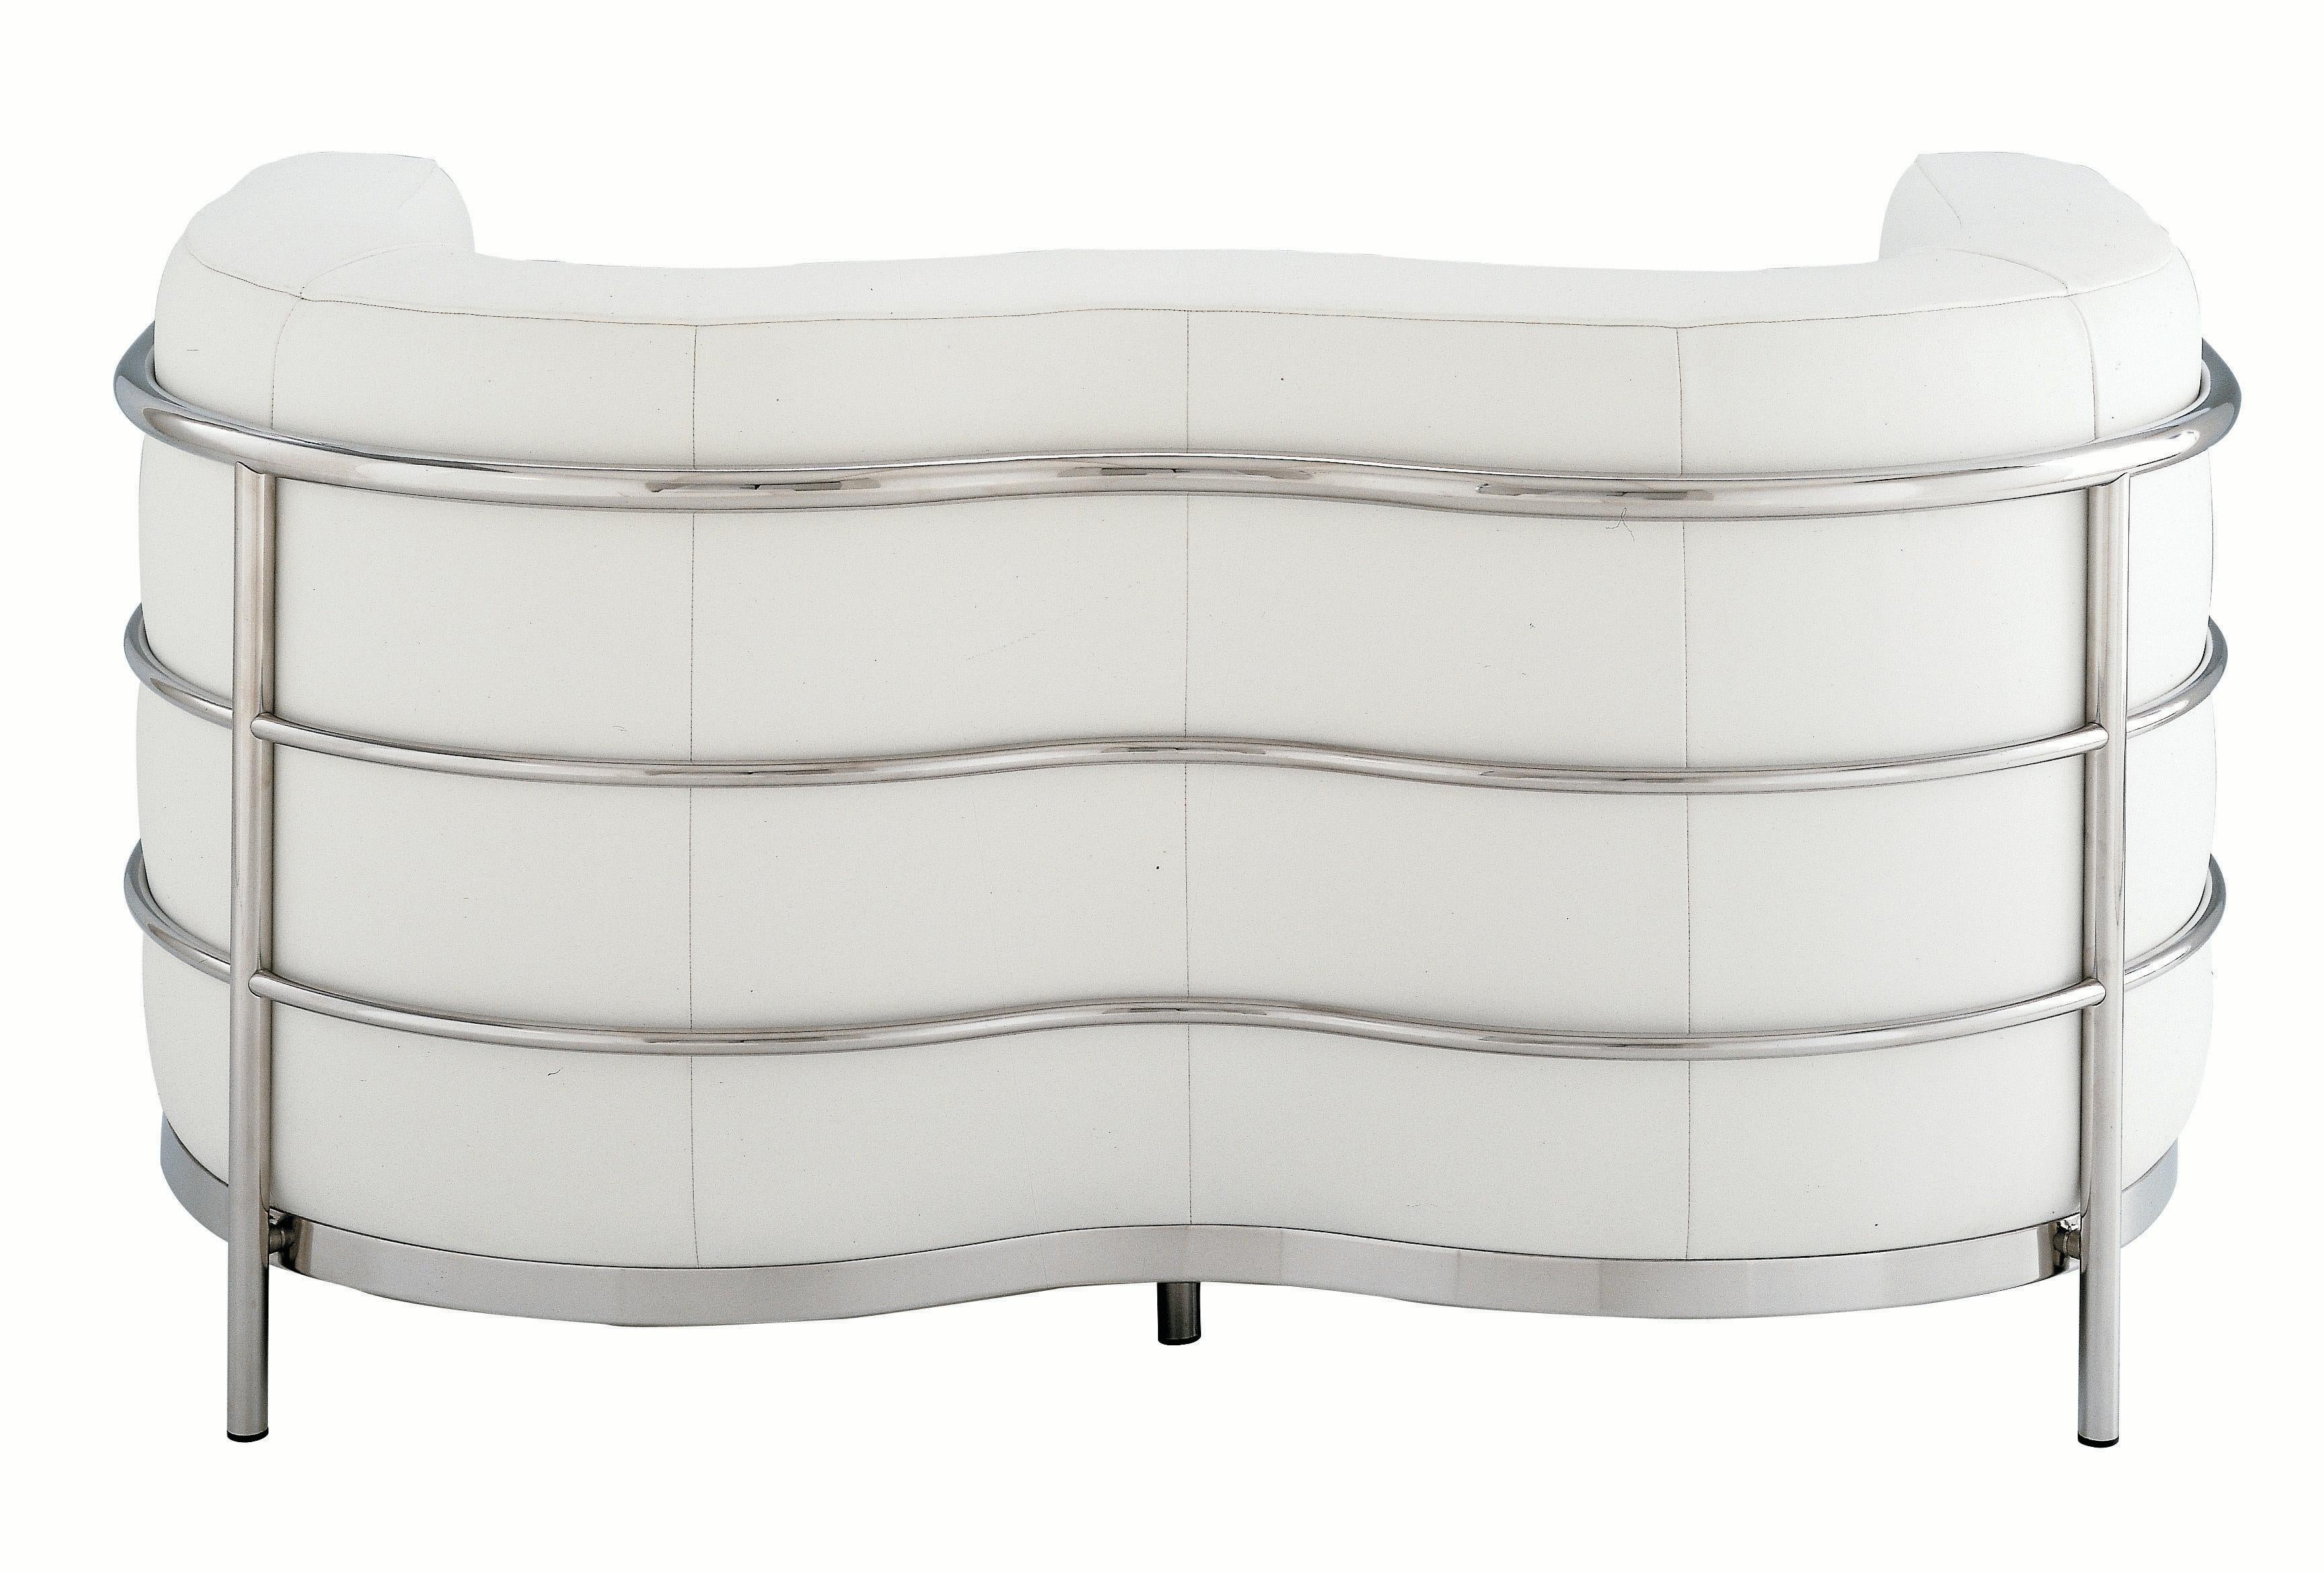 Zanotta Onda Armchair Two-Seater Sofa in White Leather & Stainless Steel Frame by De Pas, D’Urbino, Lomazzi

18/8 stainless steel tubular frame. Upholstery in graduated polyurethane/ heat-bound polyester fibre. Removable fabric or leather cover.